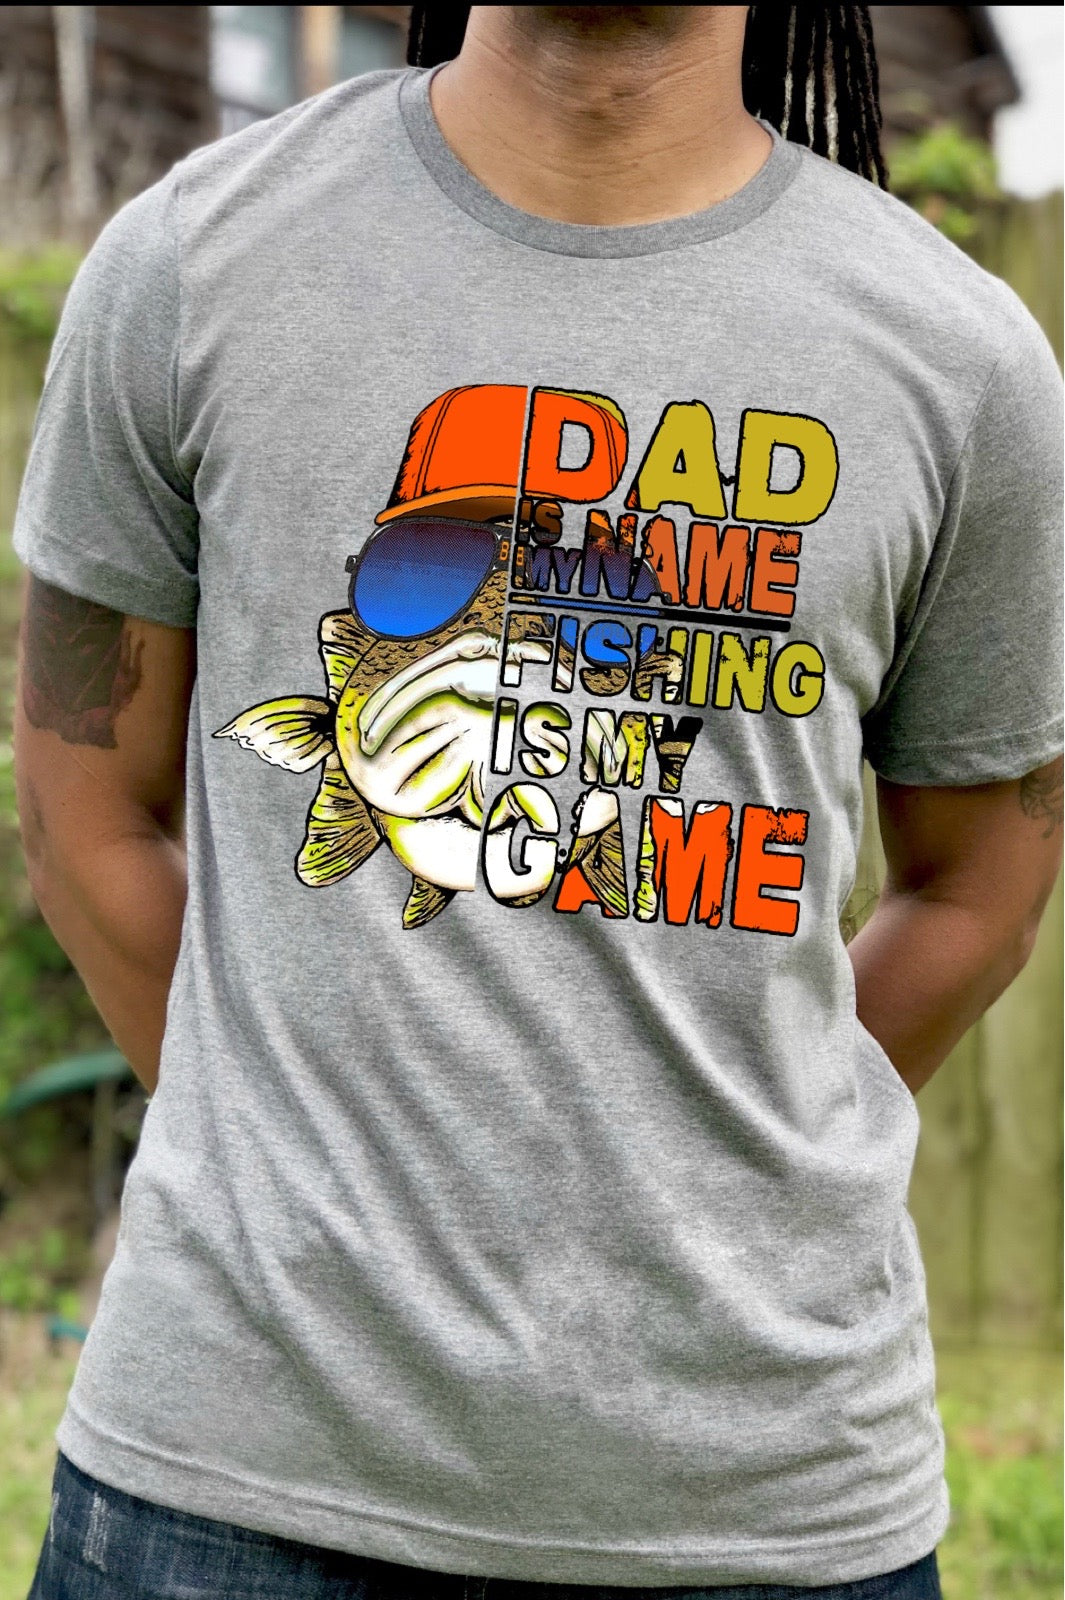 Dad is my name fishing is my game  - DTF